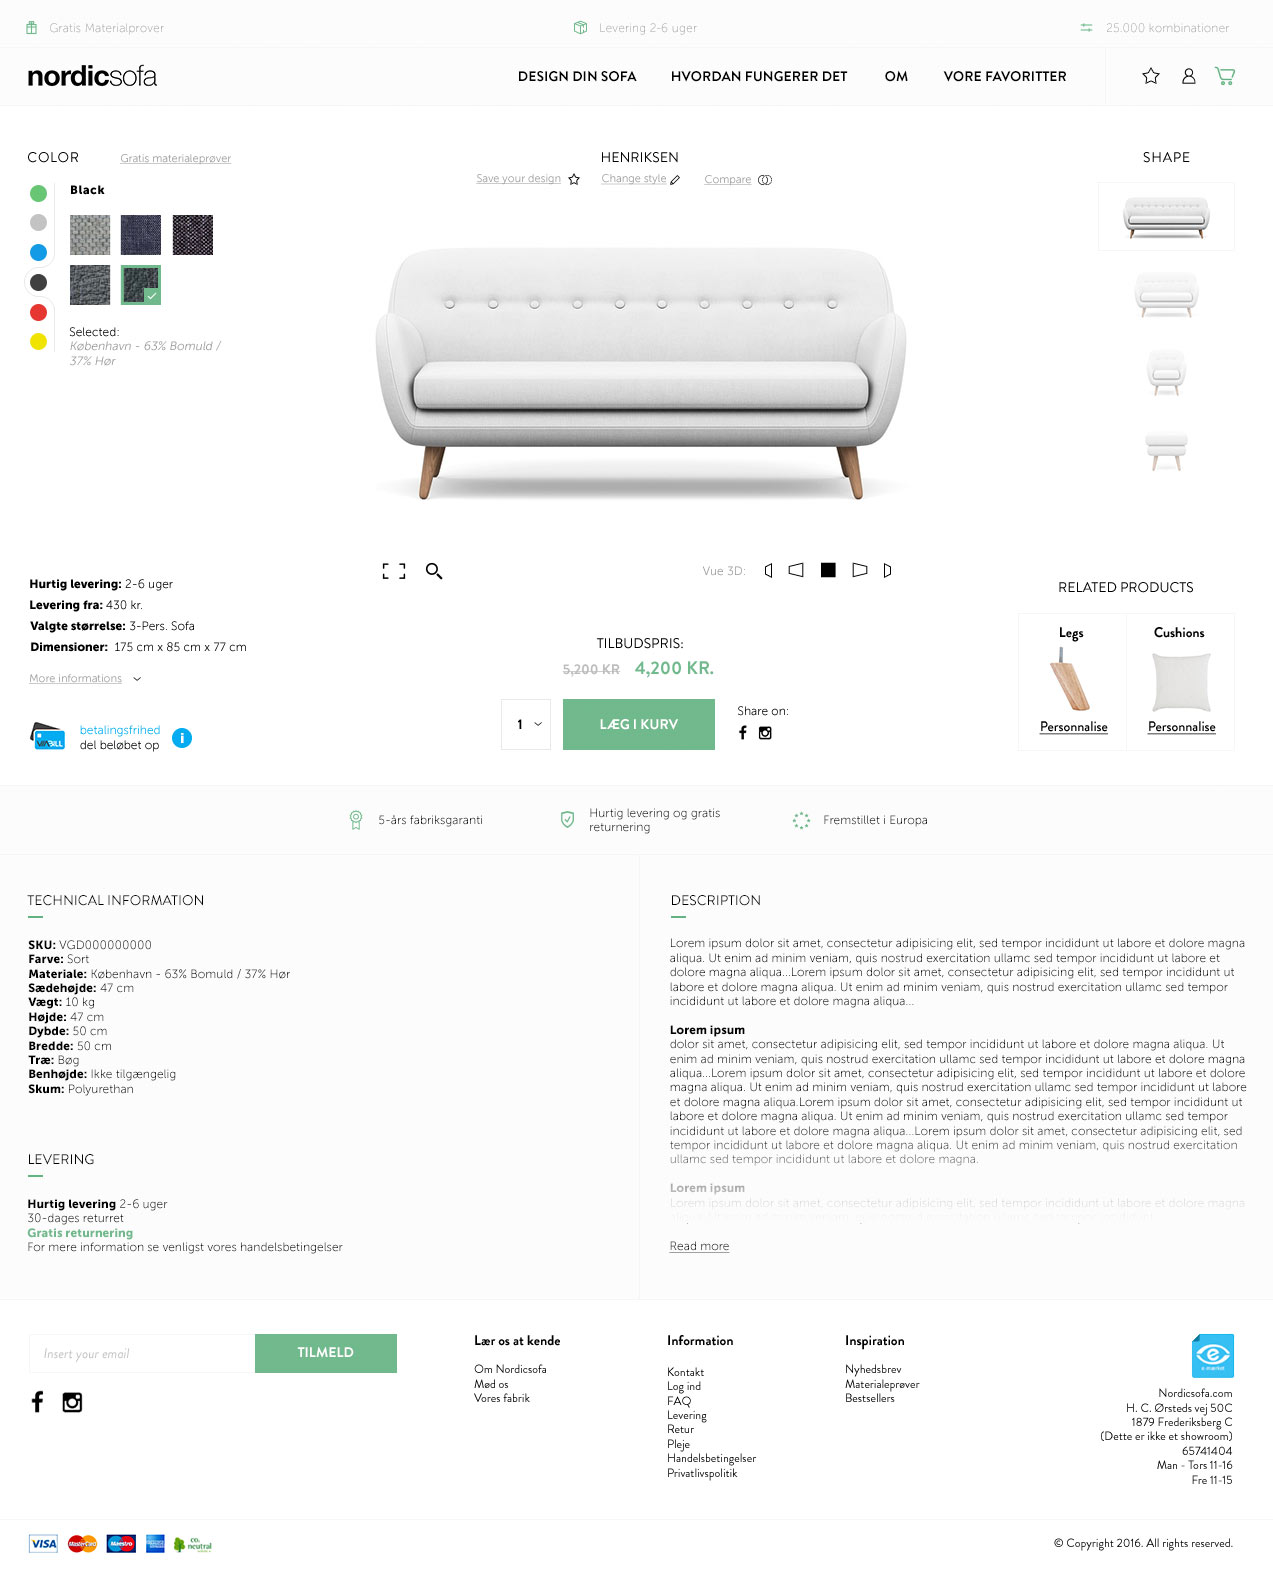 Webdesign nordicsofa Product page, graphic design with ux